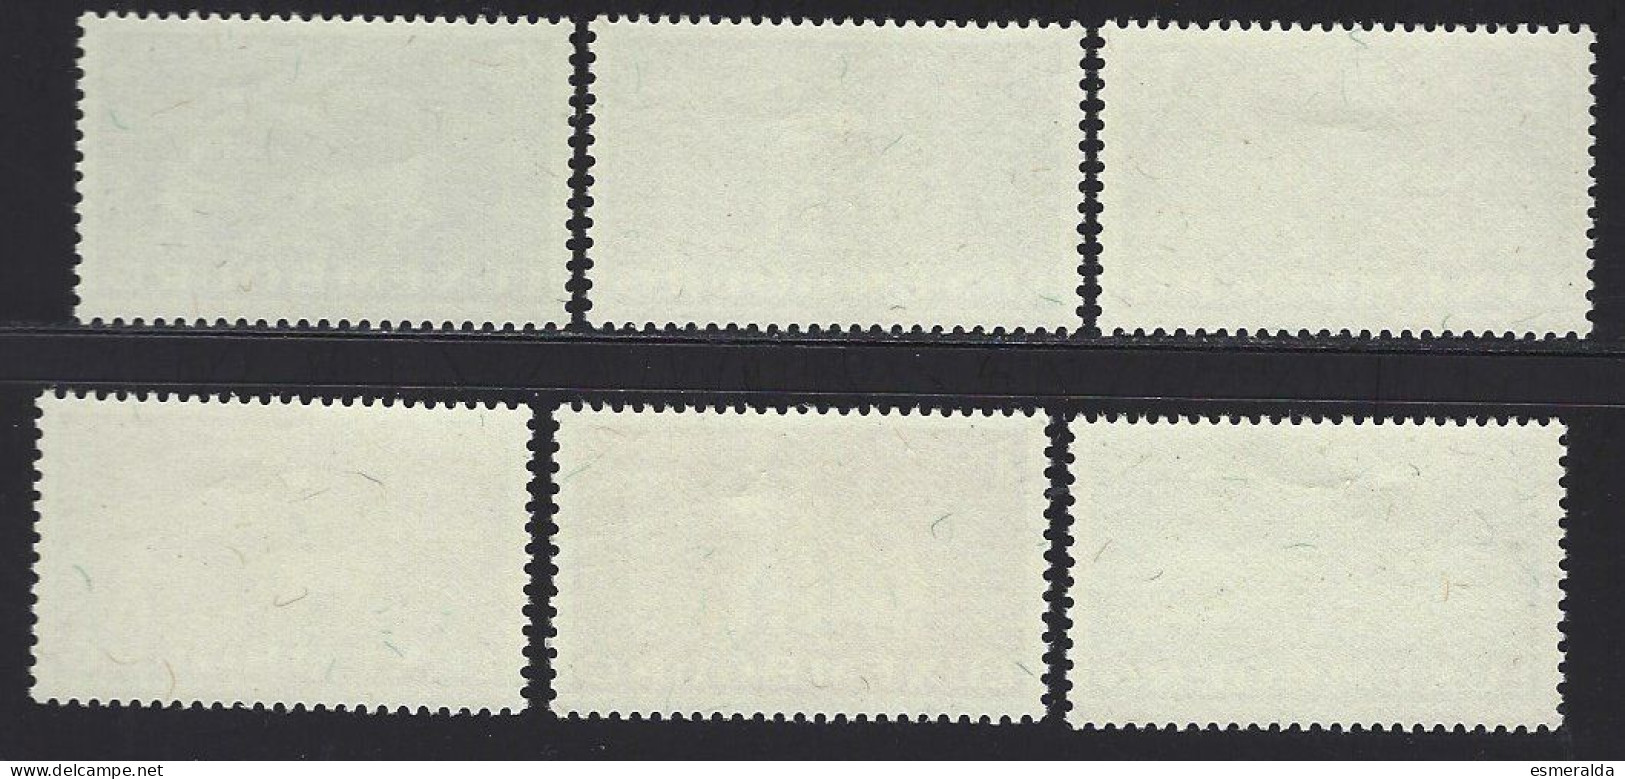 Luxembourg Yv 443/8, L'Europe Unie **/mnh - Unused Stamps